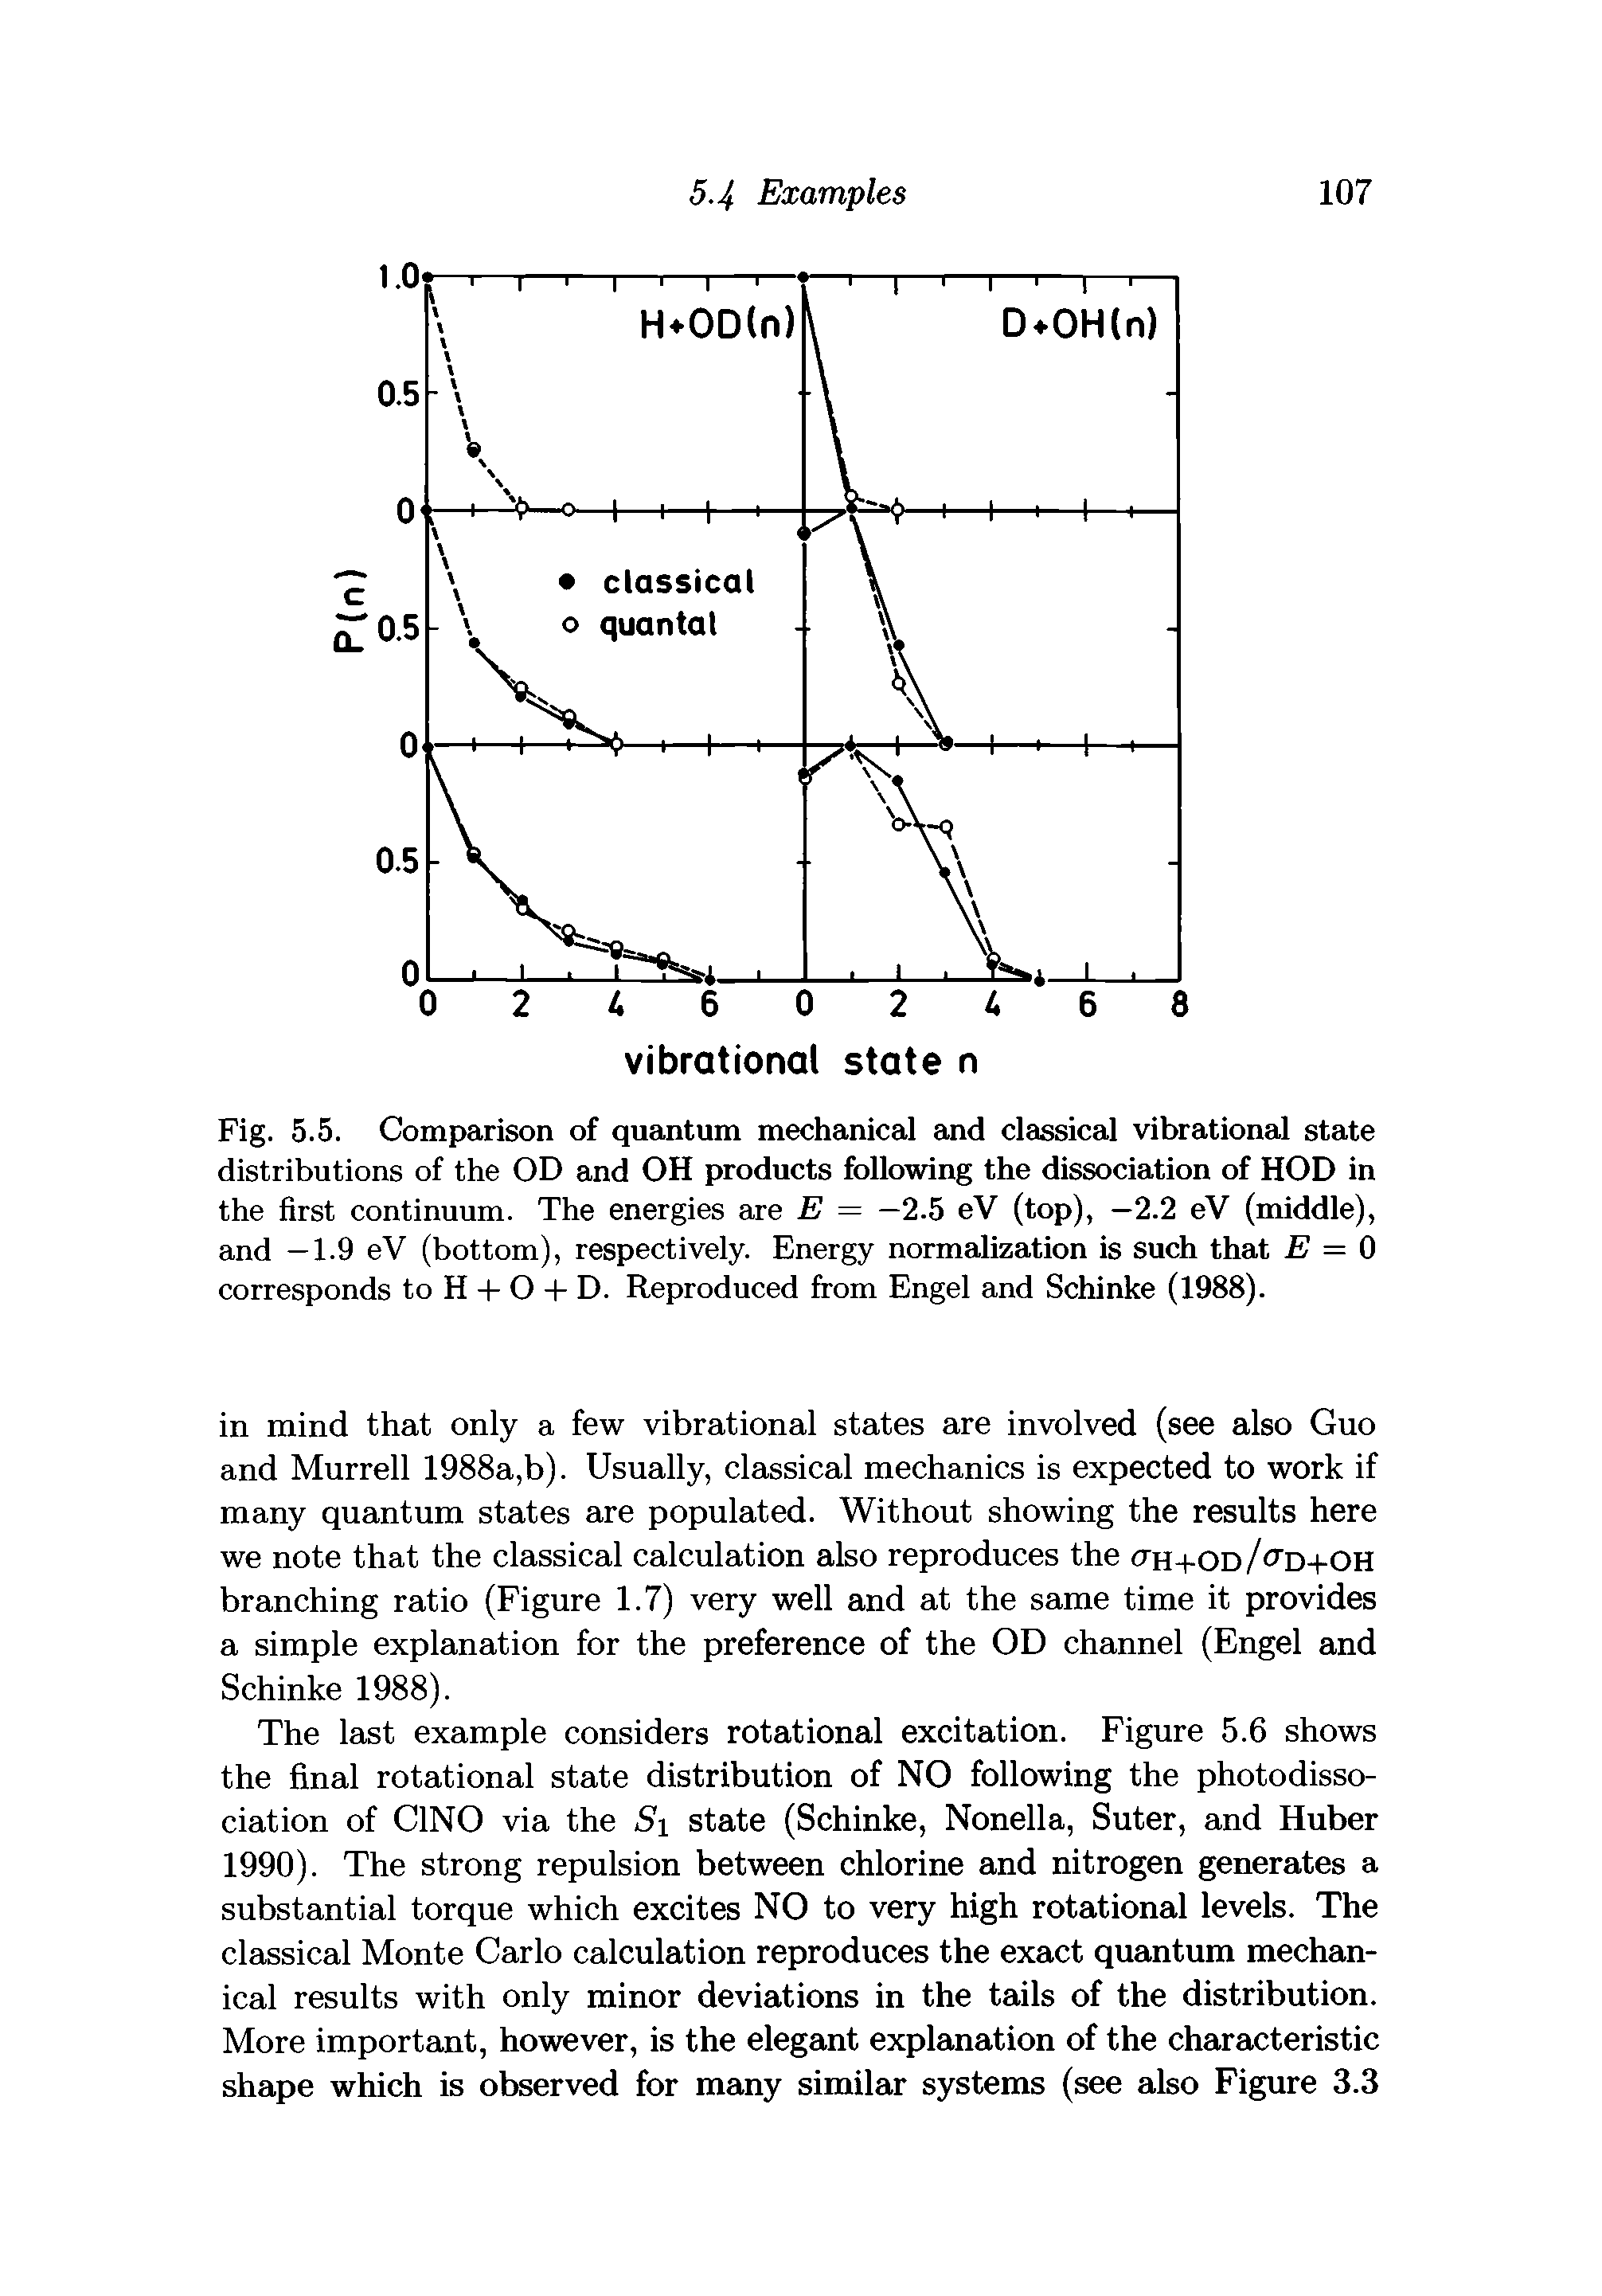 Fig. 5.5. Comparison of quantum mechanical and classical vibrational state distributions of the OD and OH products following the dissociation of HOD in the first continuum. The energies are E = -2.5 eV (top), -2.2 eV (middle), and —1.9 eV (bottom), respectively. Energy normalization is such that E = 0 corresponds to H + O + D. Reproduced from Engel and Schinke (1988).